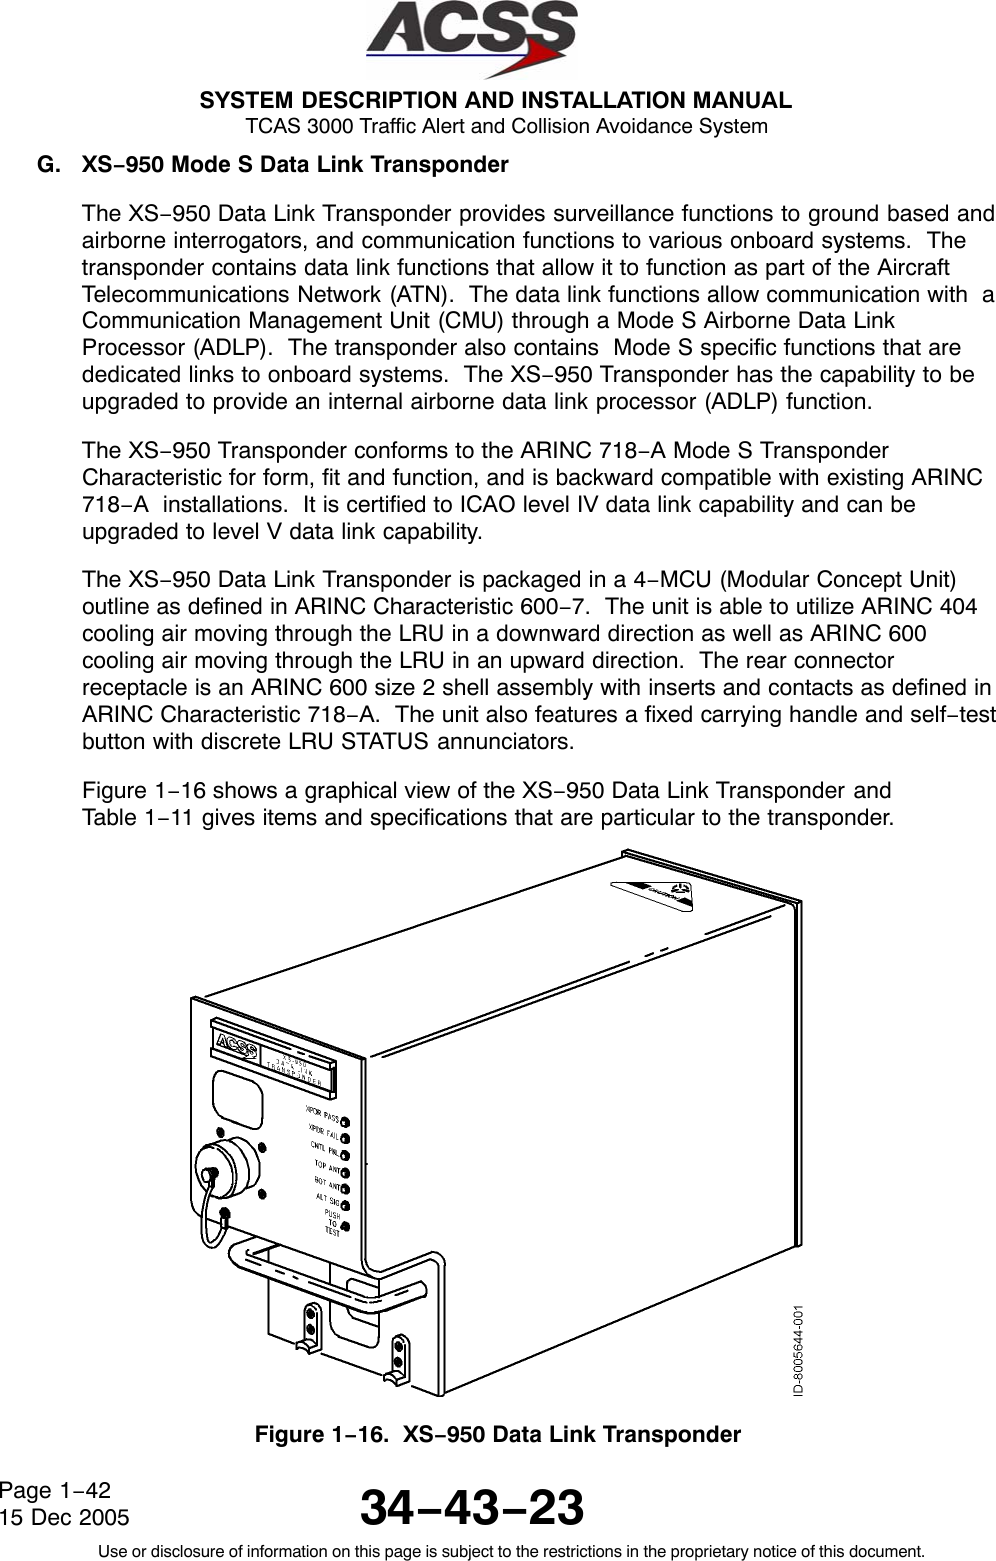  SYSTEM DESCRIPTION AND INSTALLATION MANUAL TCAS 3000 Traffic Alert and Collision Avoidance System34−43−23Use or disclosure of information on this page is subject to the restrictions in the proprietary notice of this document.Page 1−4215 Dec 2005G. XS−950 Mode S Data Link TransponderThe XS−950 Data Link Transponder provides surveillance functions to ground based andairborne interrogators, and communication functions to various onboard systems.  Thetransponder contains data link functions that allow it to function as part of the AircraftTelecommunications Network (ATN).  The data link functions allow communication with  aCommunication Management Unit (CMU) through a Mode S Airborne Data LinkProcessor (ADLP).  The transponder also contains  Mode S specific functions that arededicated links to onboard systems.  The XS−950 Transponder has the capability to beupgraded to provide an internal airborne data link processor (ADLP) function.The XS−950 Transponder conforms to the ARINC 718−A Mode S TransponderCharacteristic for form, fit and function, and is backward compatible with existing ARINC718−A  installations.  It is certified to ICAO level IV data link capability and can beupgraded to level V data link capability.The XS−950 Data Link Transponder is packaged in a 4−MCU (Modular Concept Unit)outline as defined in ARINC Characteristic 600−7.  The unit is able to utilize ARINC 404cooling air moving through the LRU in a downward direction as well as ARINC 600cooling air moving through the LRU in an upward direction.  The rear connectorreceptacle is an ARINC 600 size 2 shell assembly with inserts and contacts as defined inARINC Characteristic 718−A.  The unit also features a fixed carrying handle and self−testbutton with discrete LRU STATUS annunciators.Figure 1−16 shows a graphical view of the XS−950 Data Link Transponder andTable 1−11 gives items and specifications that are particular to the transponder.Figure 1−16.  XS−950 Data Link Transponder